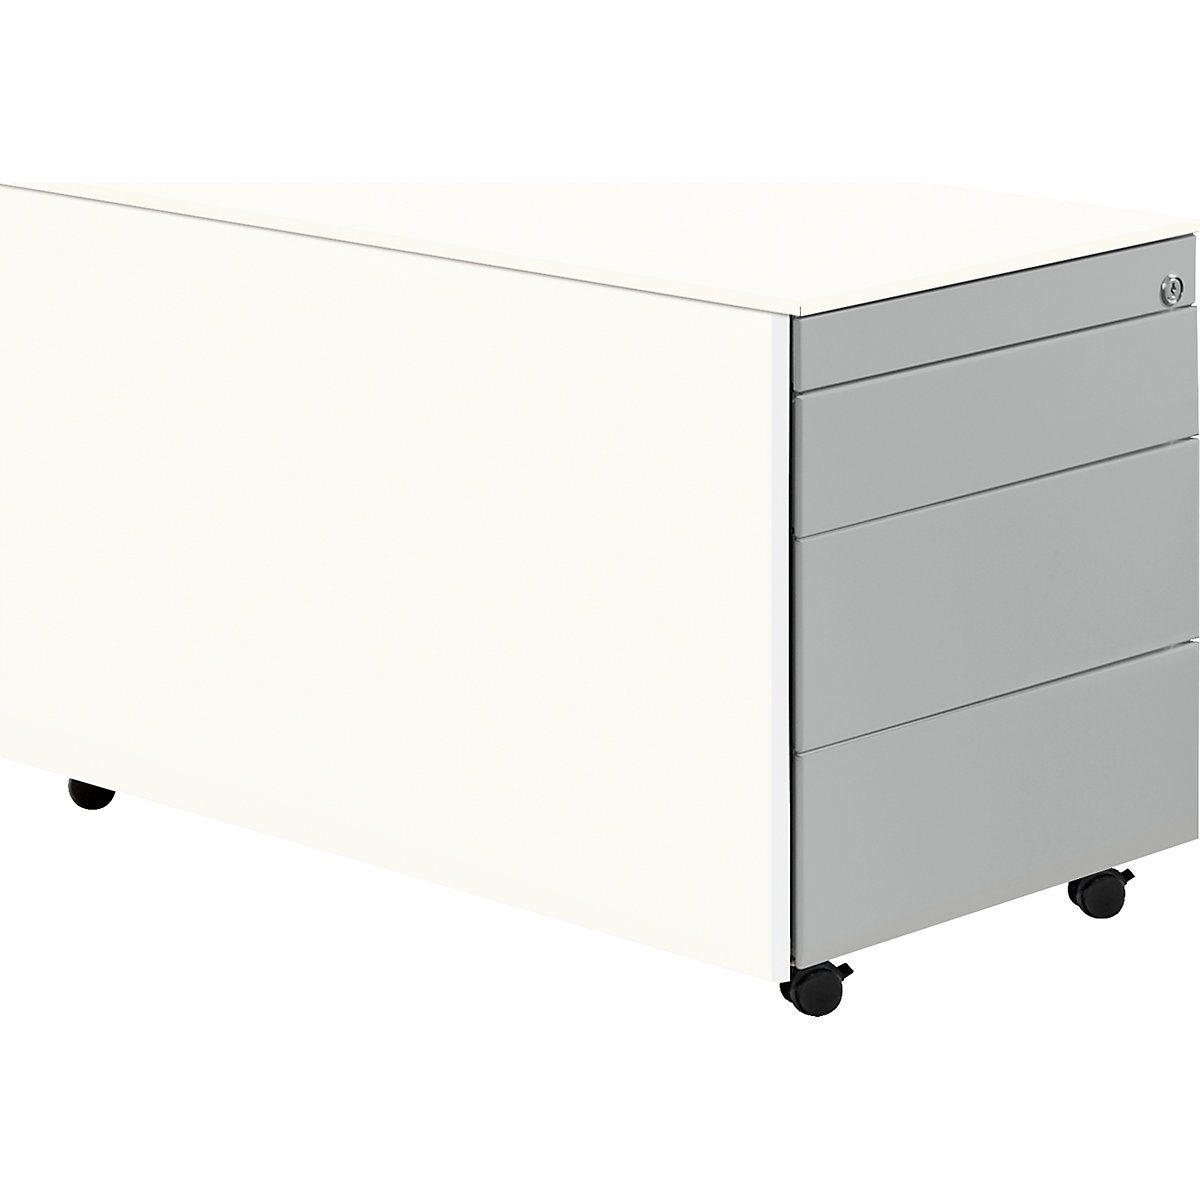 Drawer pedestal with castors – mauser, HxD 520 x 800 mm, steel top, 3 drawers, pure white / white aluminium / pure white-4